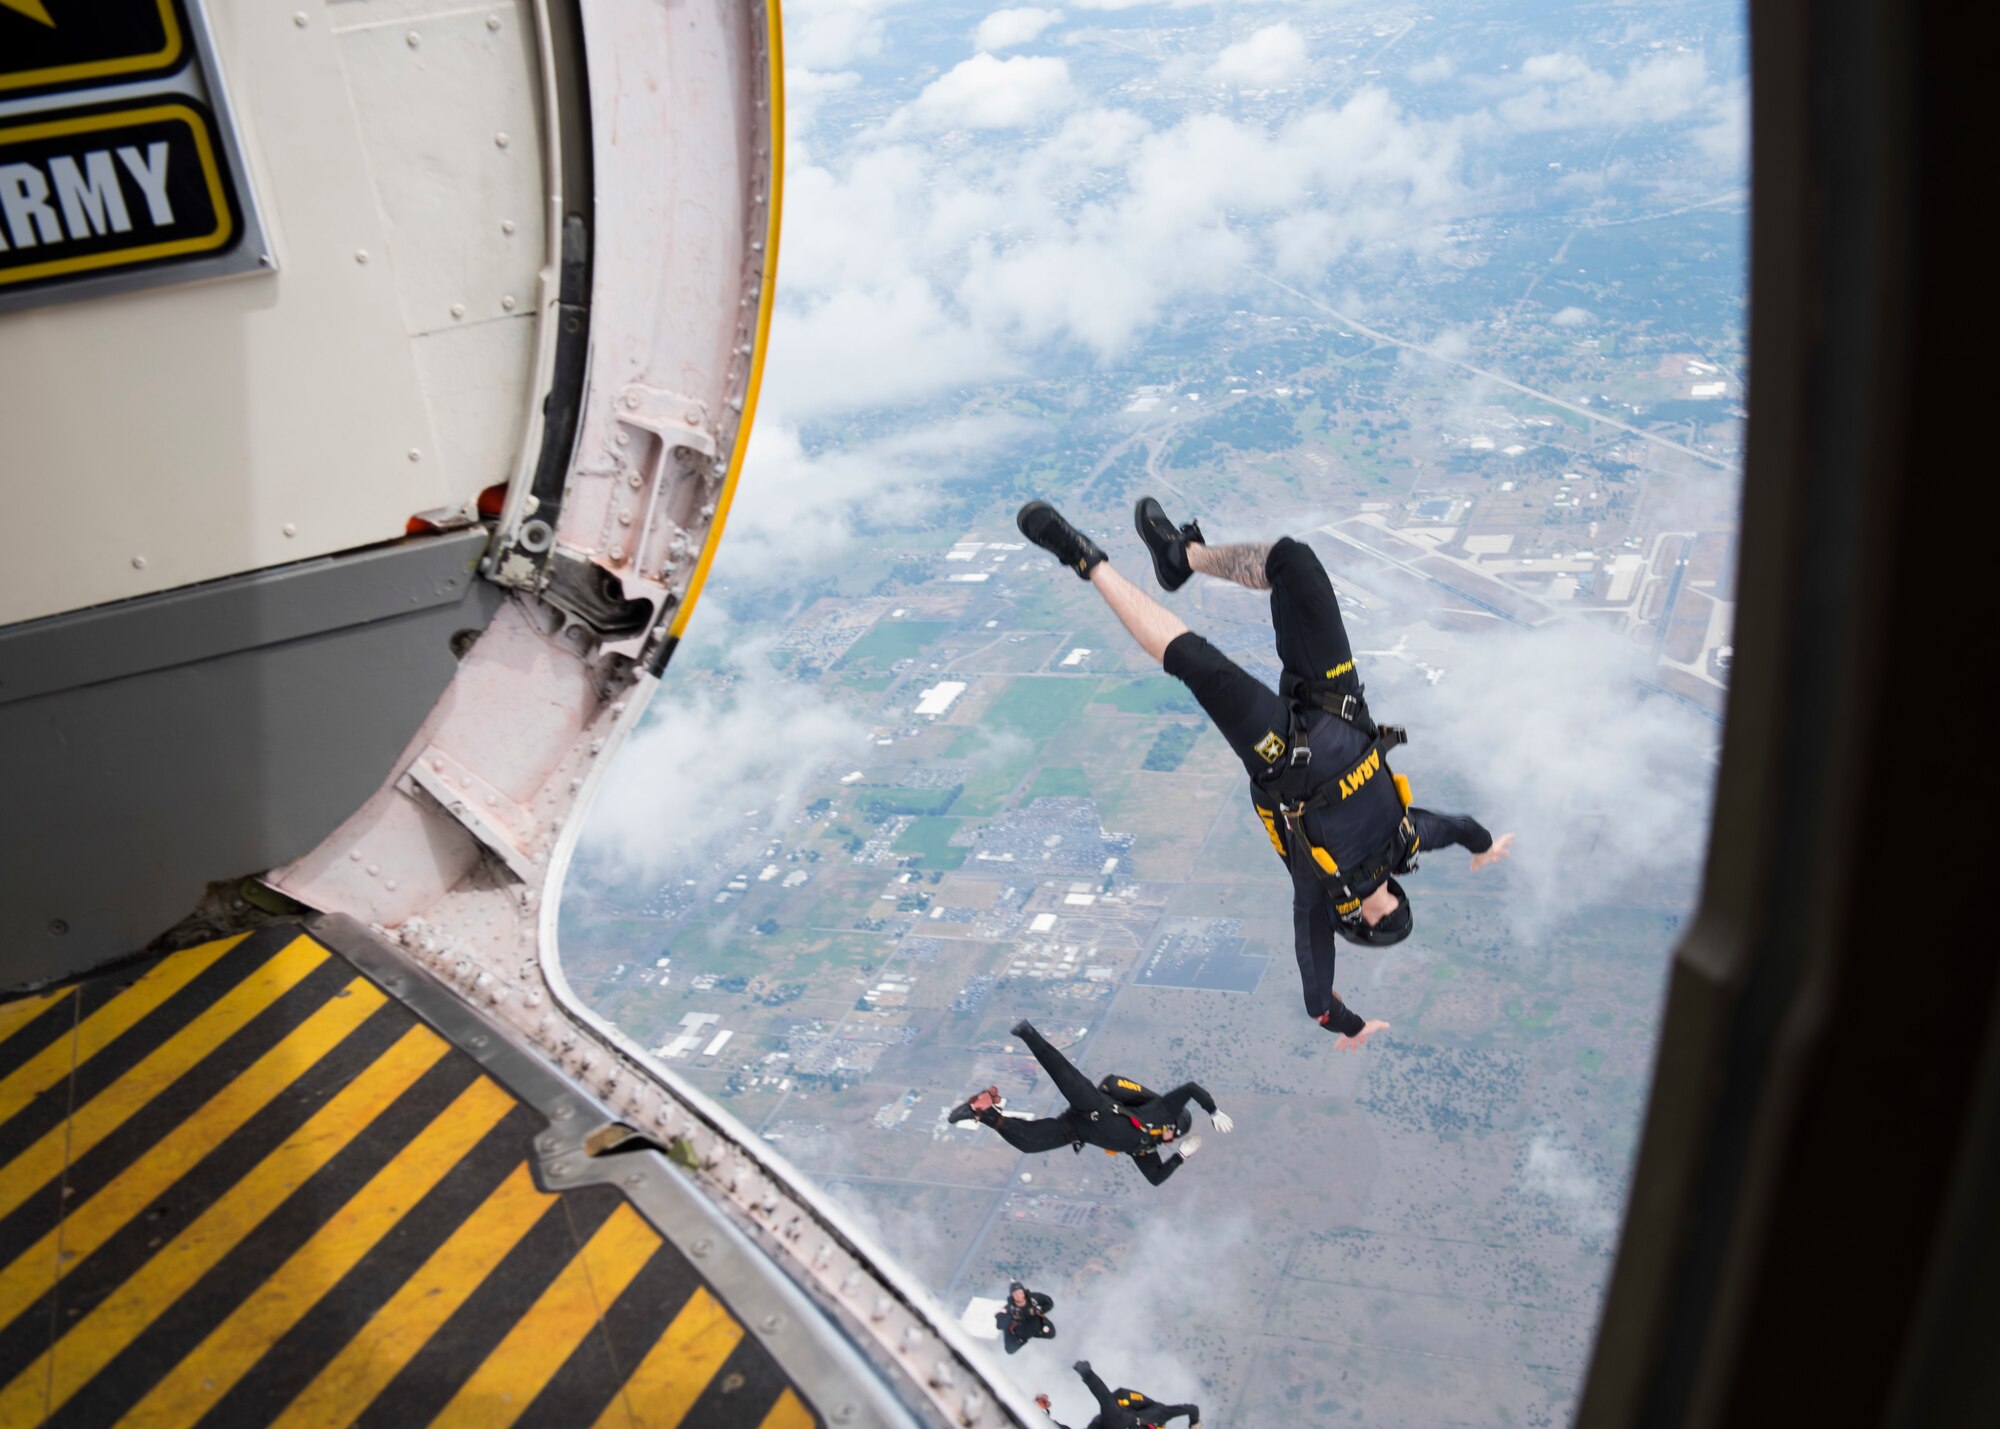 Members of the U.S. Army Golden Knights parachute team jumps as part of their performance during the Skyfest 2019 Open House and Airshow at Fairchild Air Force Base, Washington, June 22, 2019. Fairchild opened its gates to the public for a free one-day event to showcase Pacific Northwest airpower and U.S. Air Force capabilities. The airshow included the F-22 Demonstration Team, U.S. Army Golden Knights and 11 other aerial acts. (U.S. Air Force photo by Airman 1st Class Lawrence Sena)